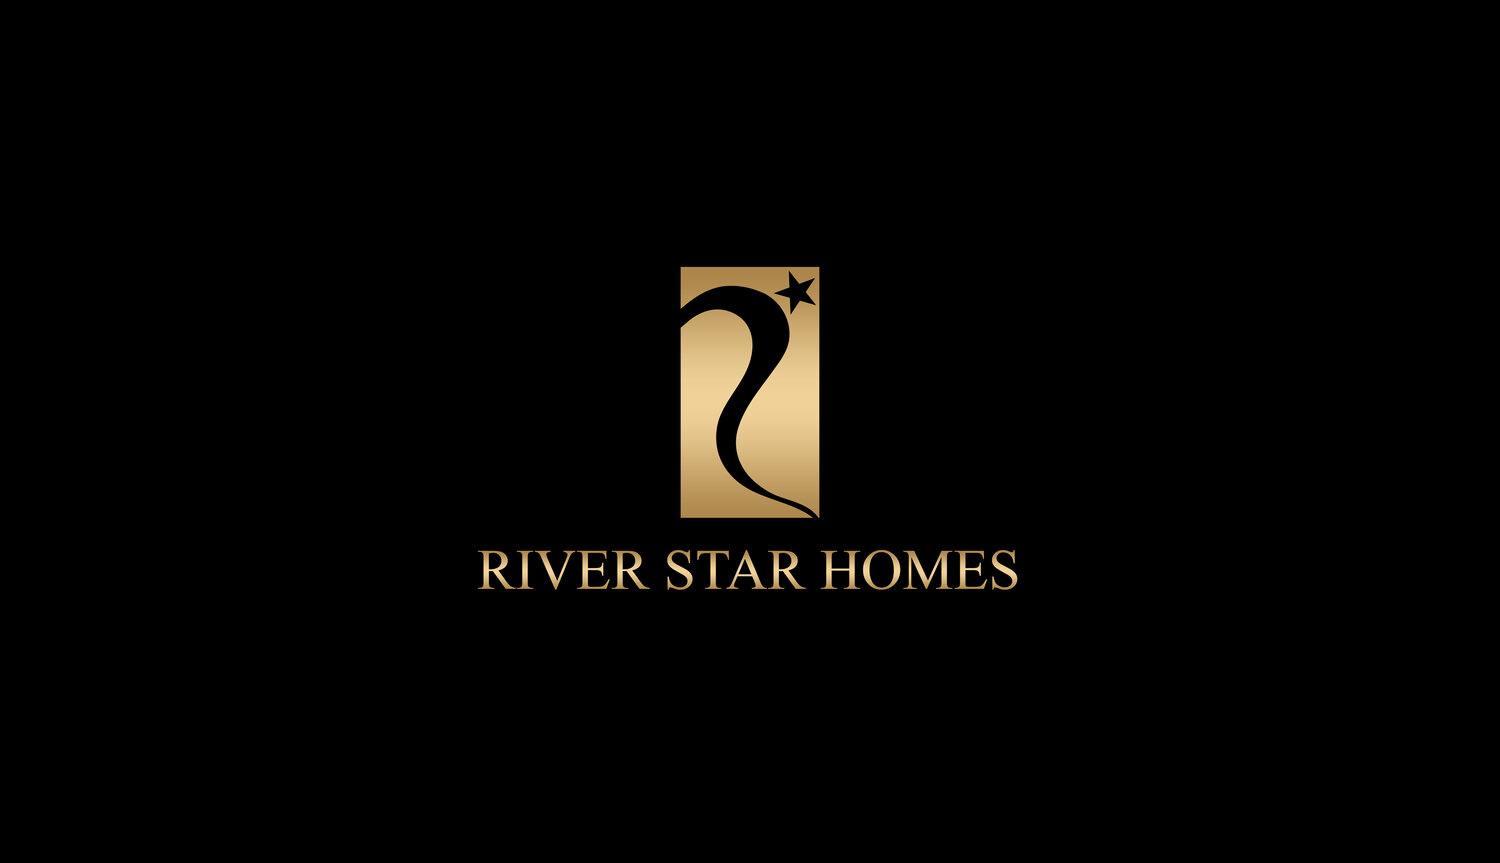 River Star Homes